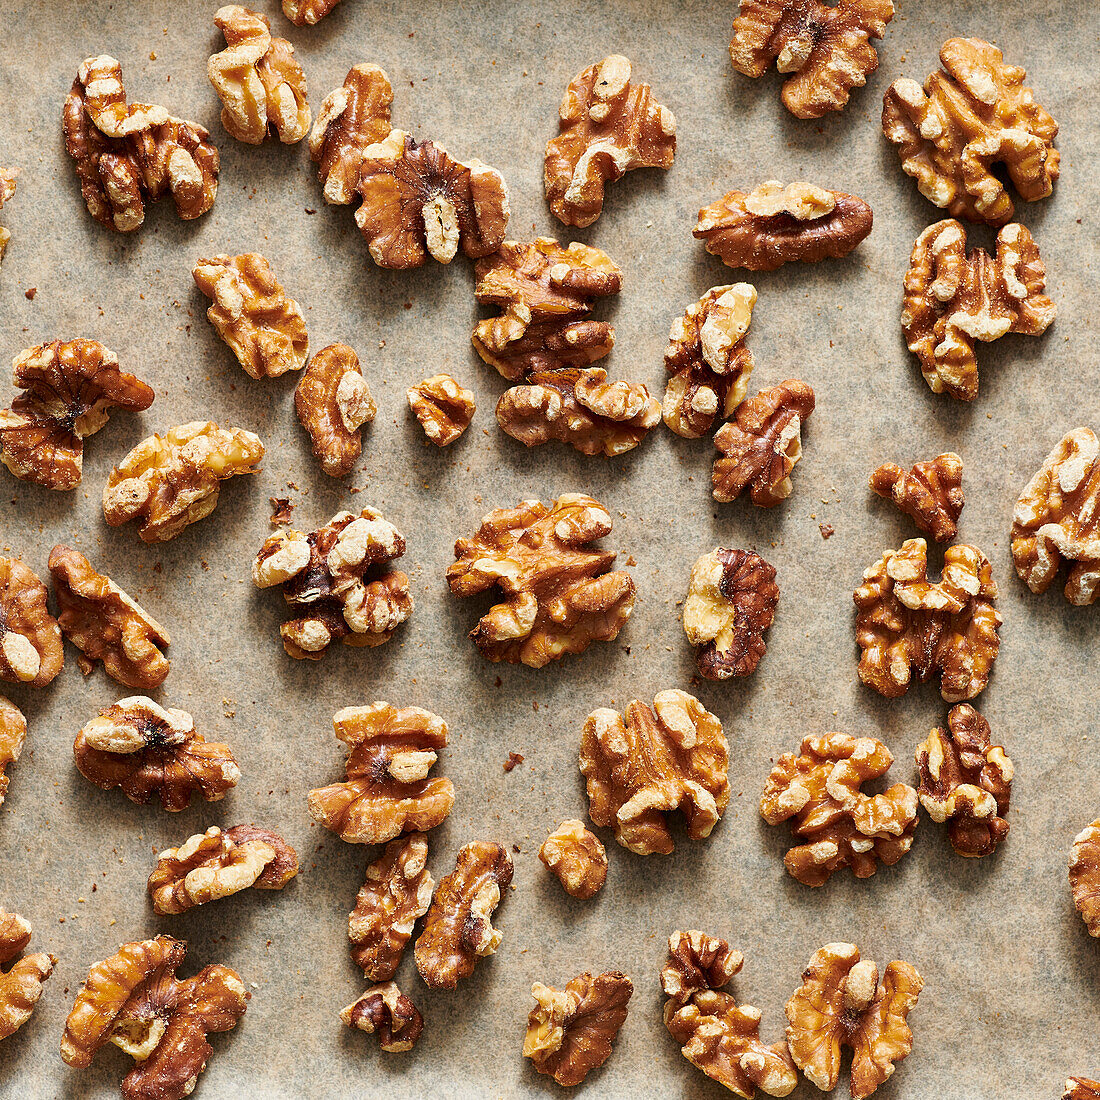 Toasted walnuts on parchment paper on a sheet pan.